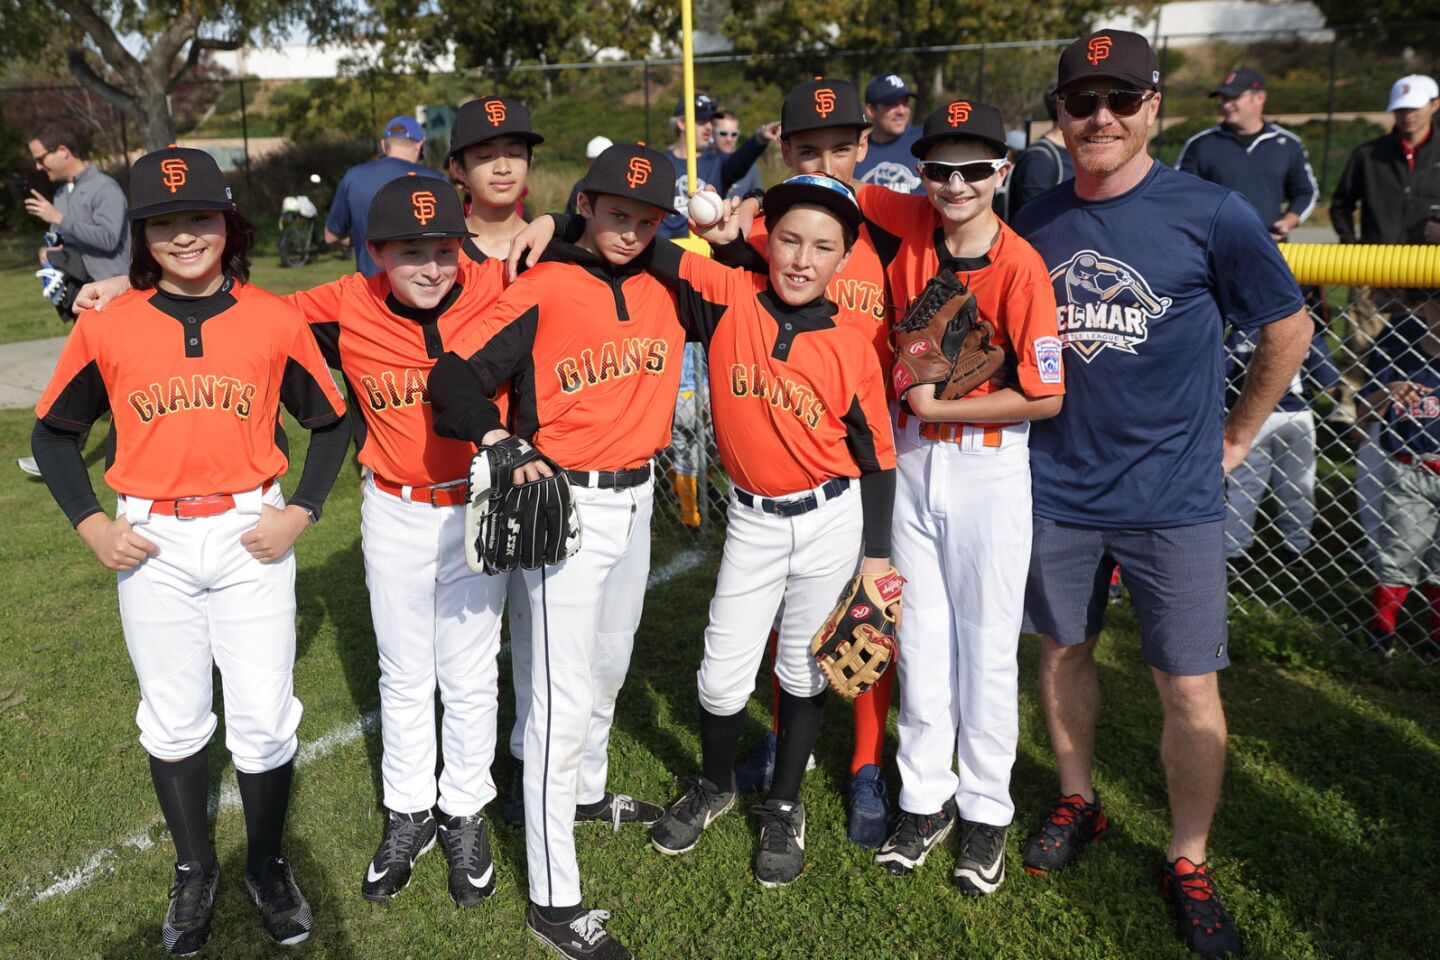 Giants at the Del Mar Little League Opening Day